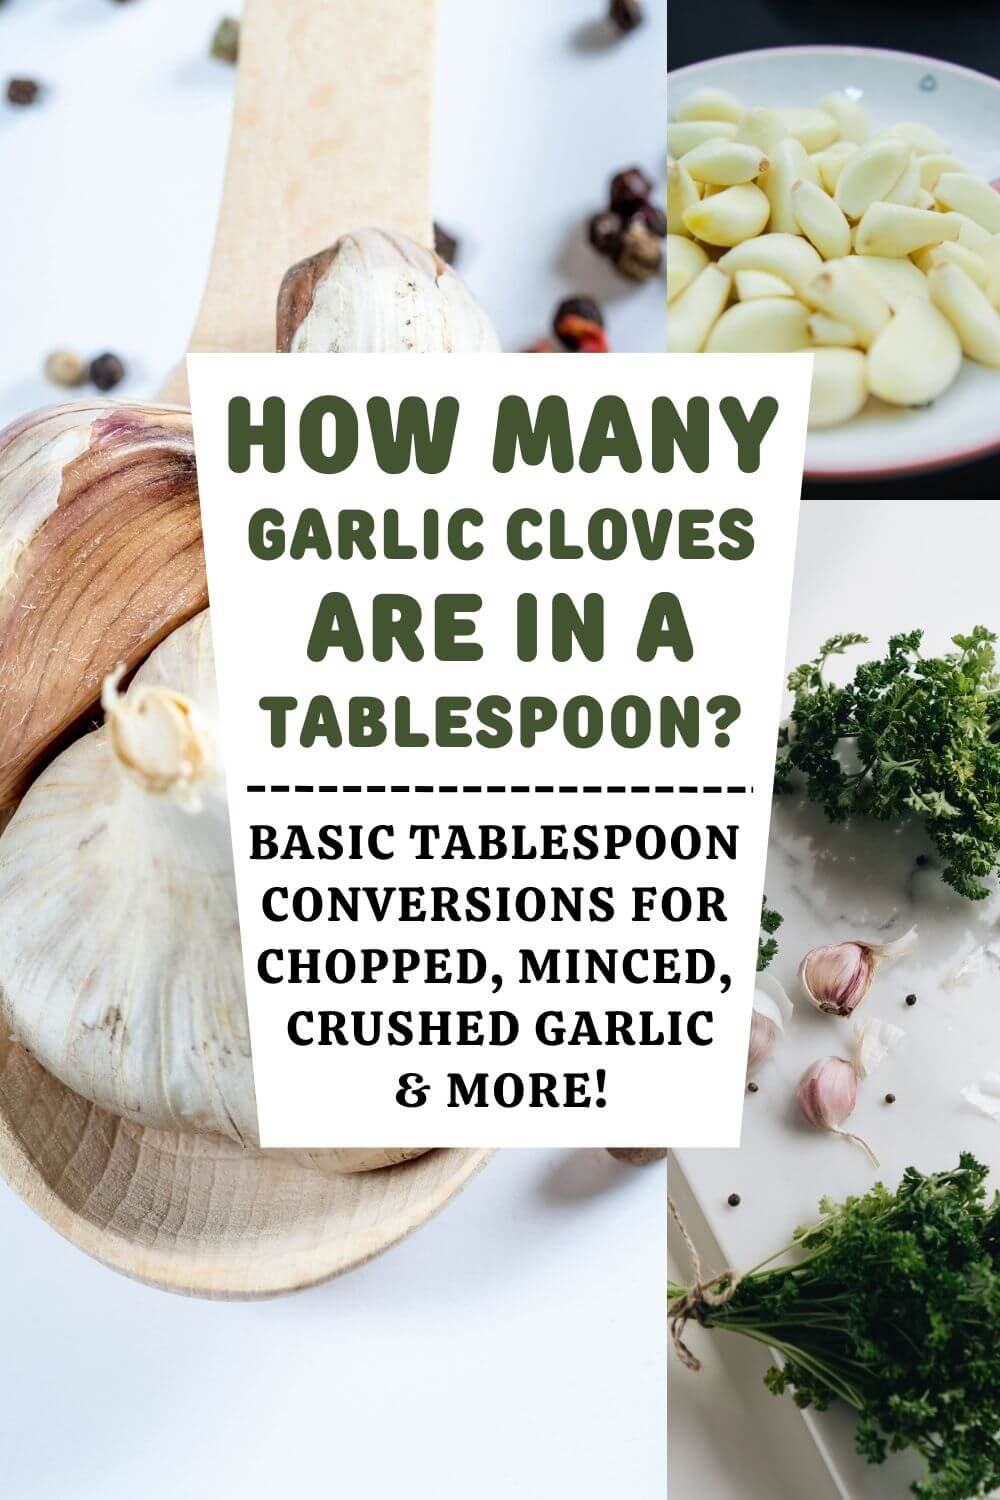 How Many Garlic Cloves Are In A Tablespoon?